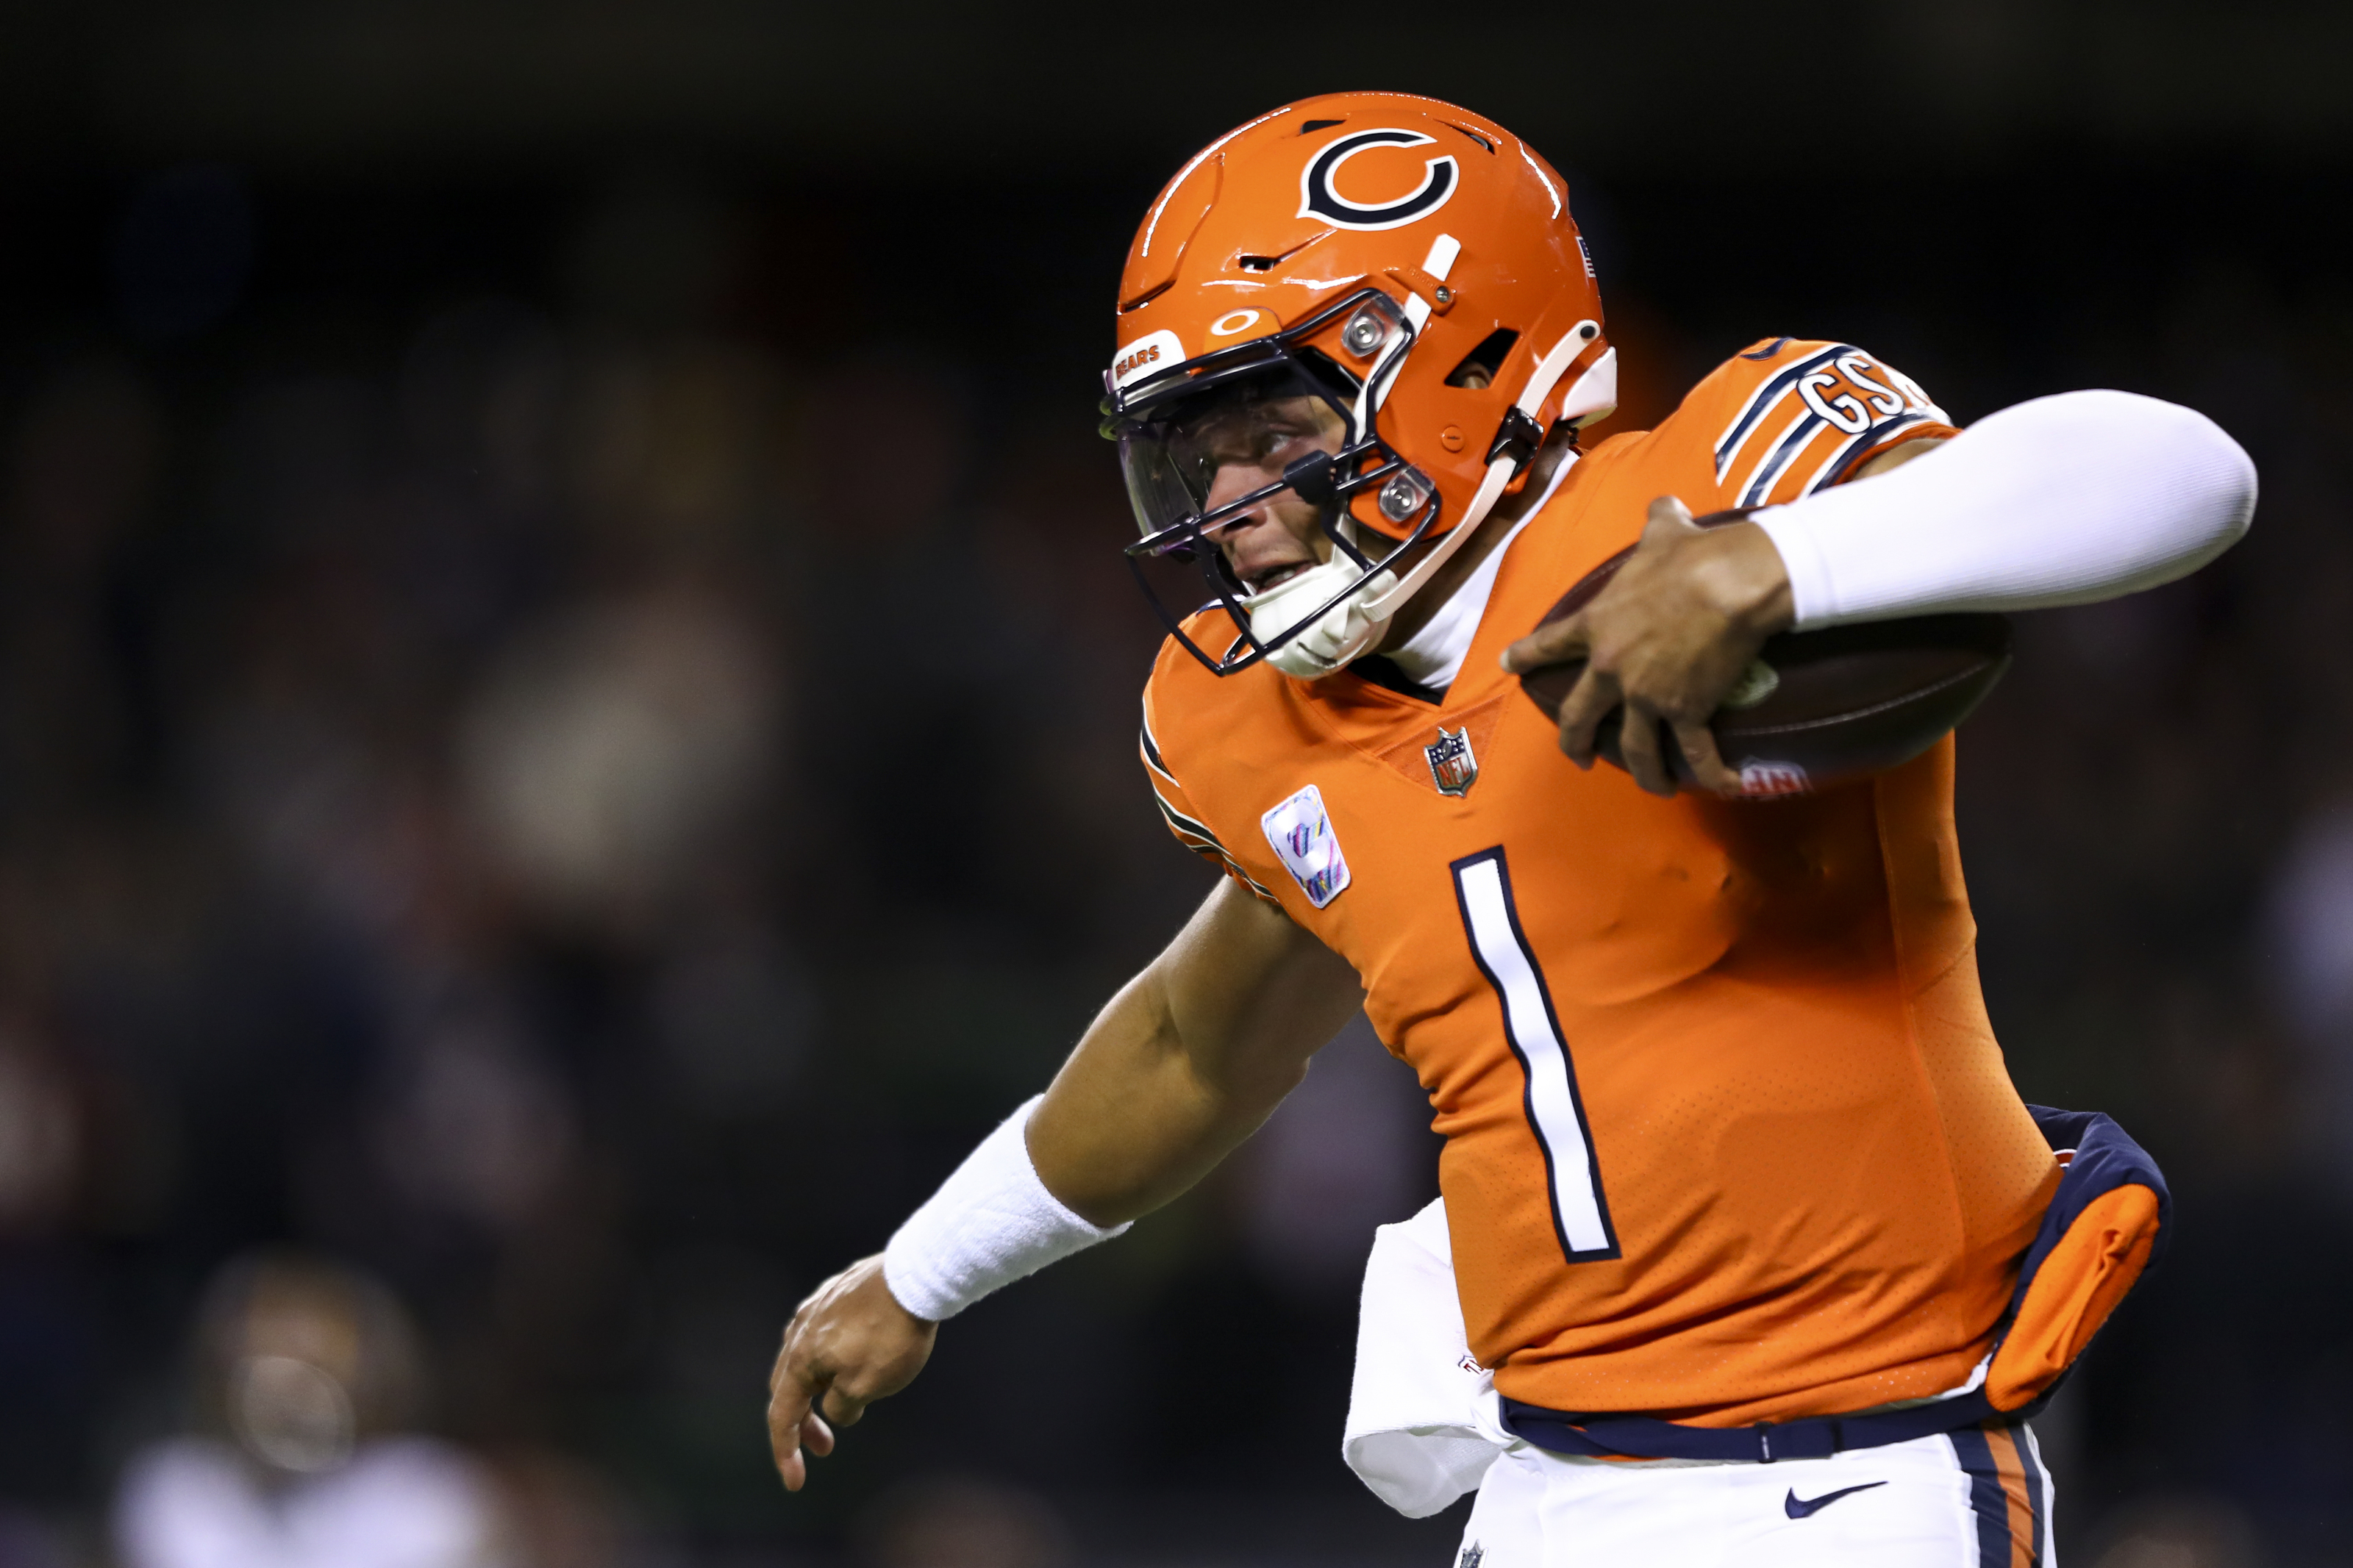 Chicago Bears: Mac Jones vs Justin Fields could be electric